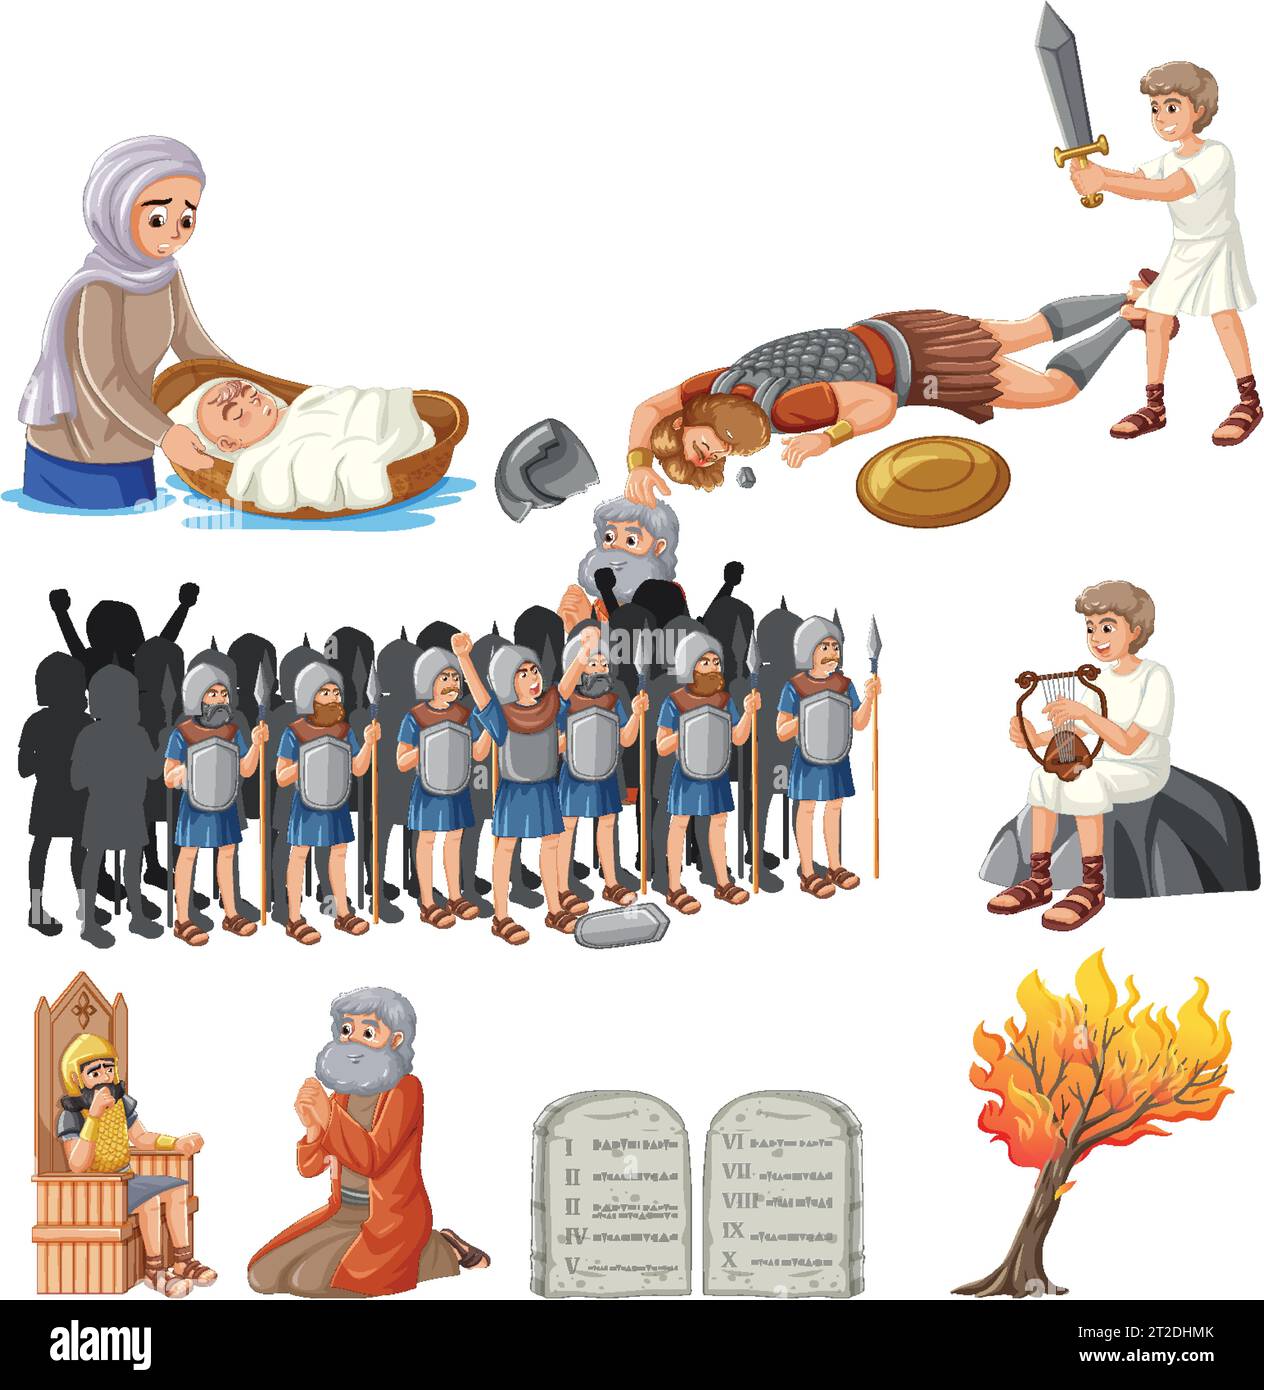 Vector cartoon illustration of characters from Bible stories Stock Vector